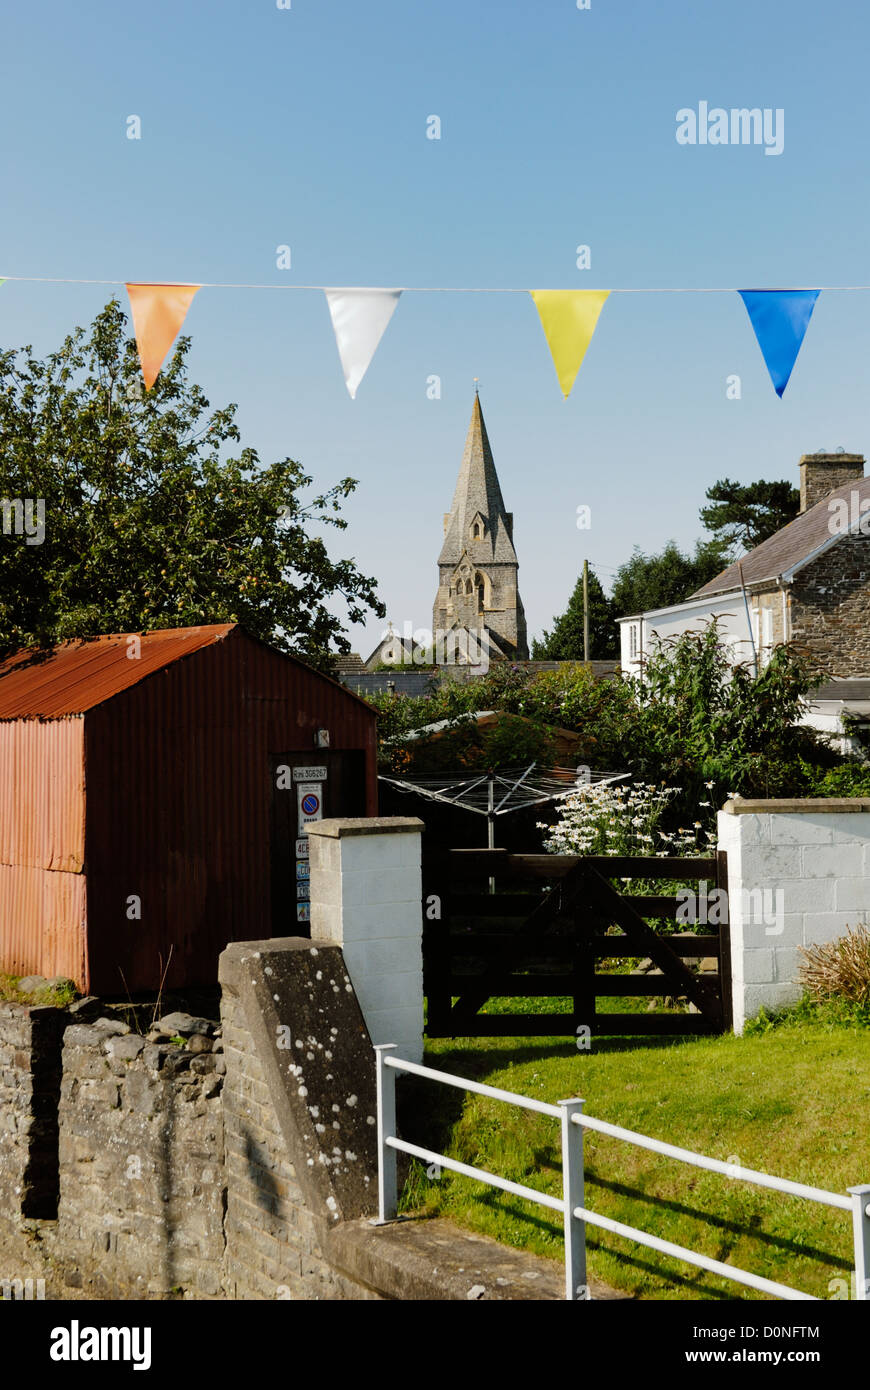 Coloured bunting in the village of Llanrhystud, Wales. Stock Photo